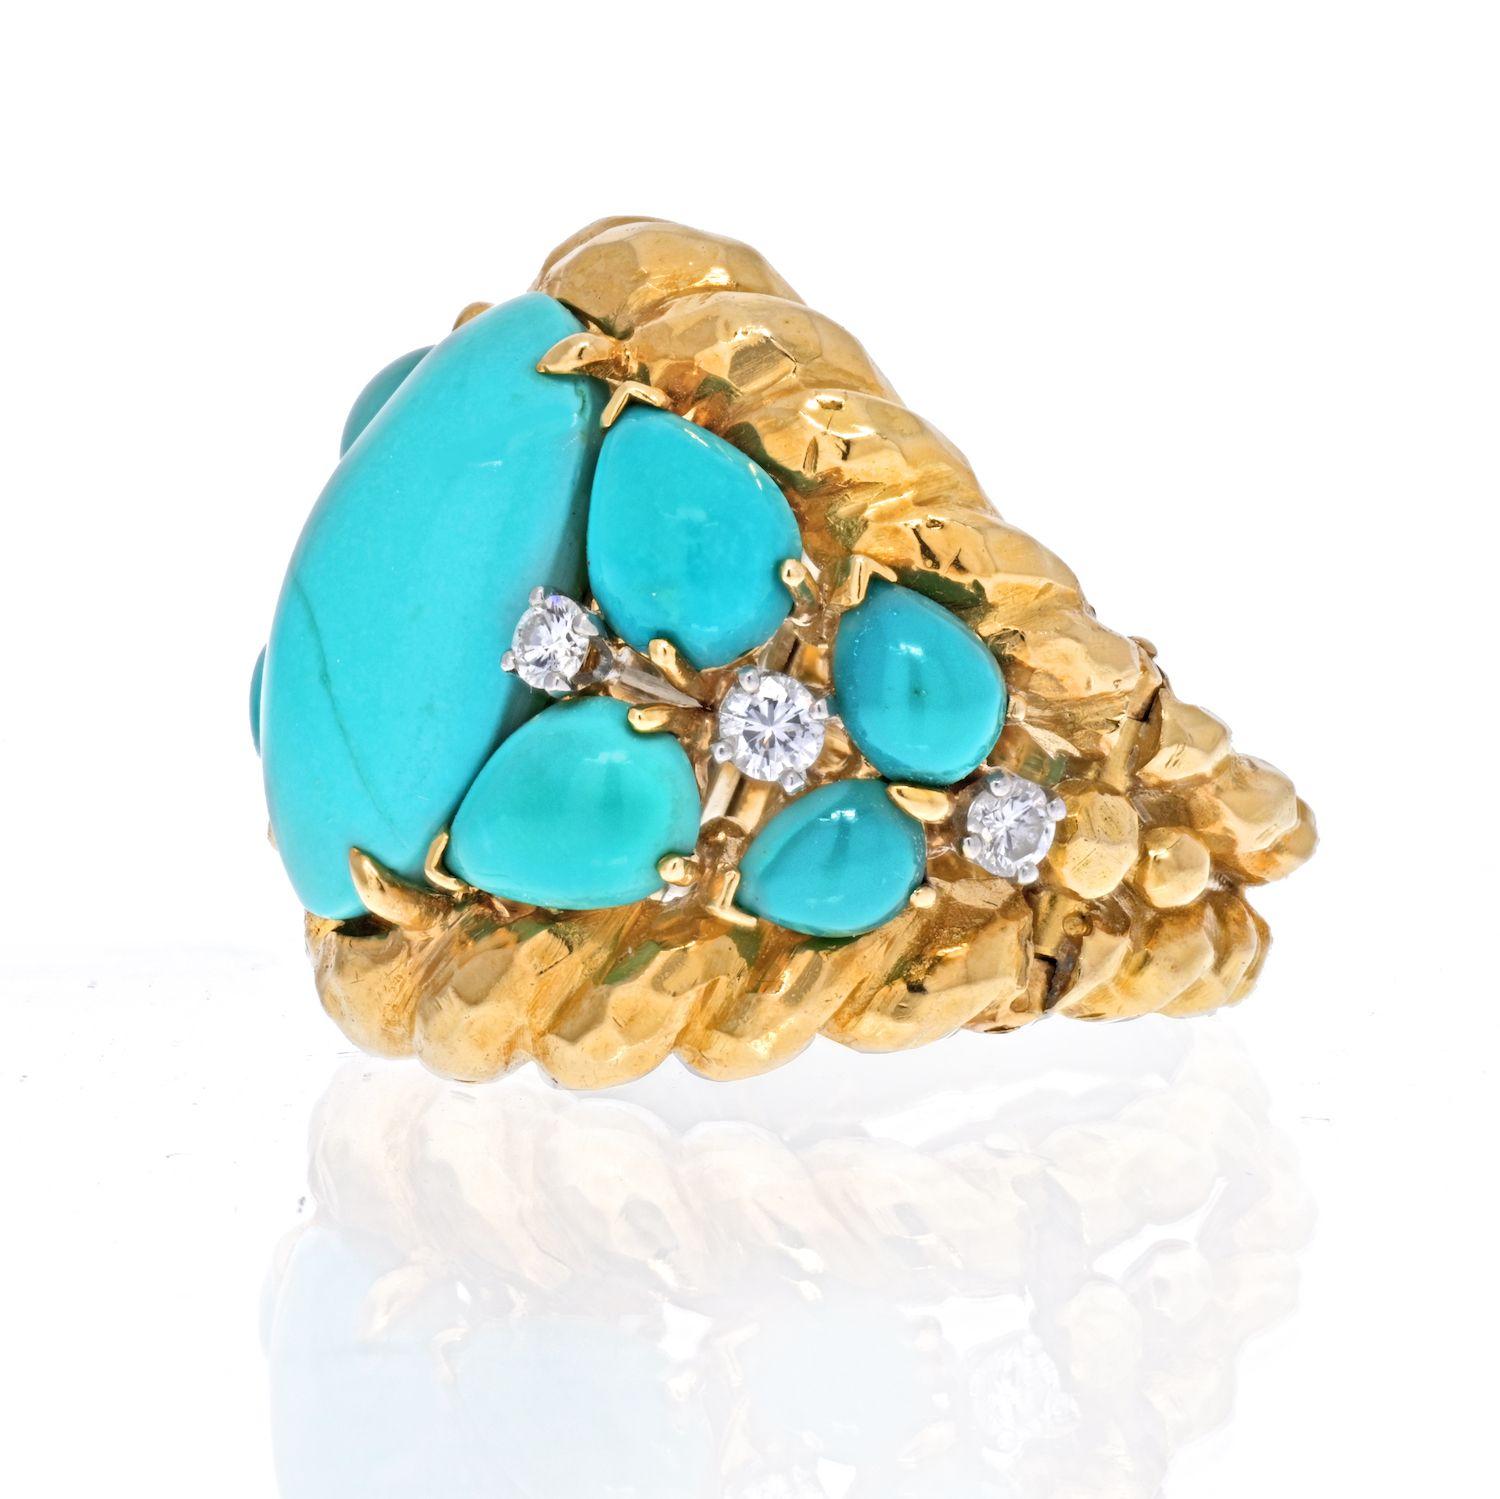 Articulated Turquoise and Diamond ring by David Webb crafted in 18k yellow gold. Designed to resemble lateral scutes as you see on a turtle, this ring has a comfortable weight. 

Captivating with turquoise's bright color, this jewel is perfect for